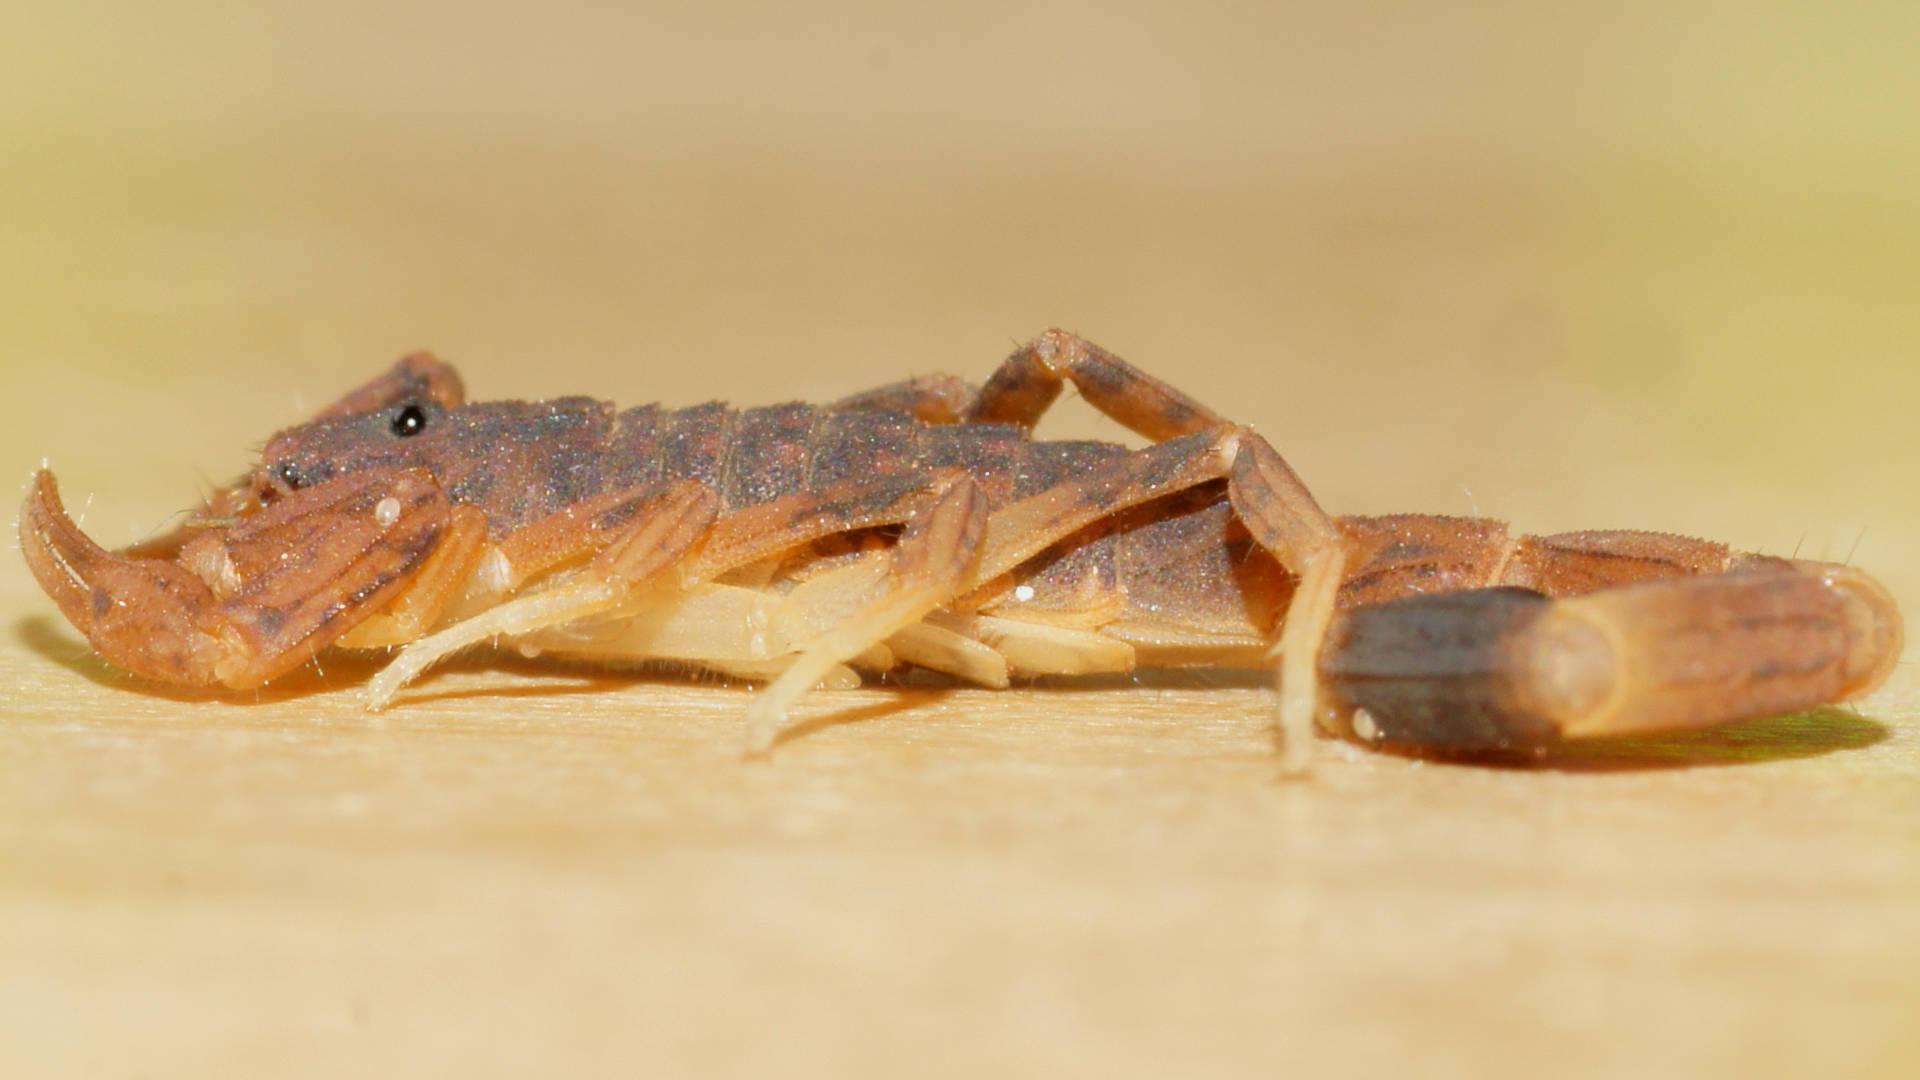 Small Marbled Scorpion (Lychas sp ES02)